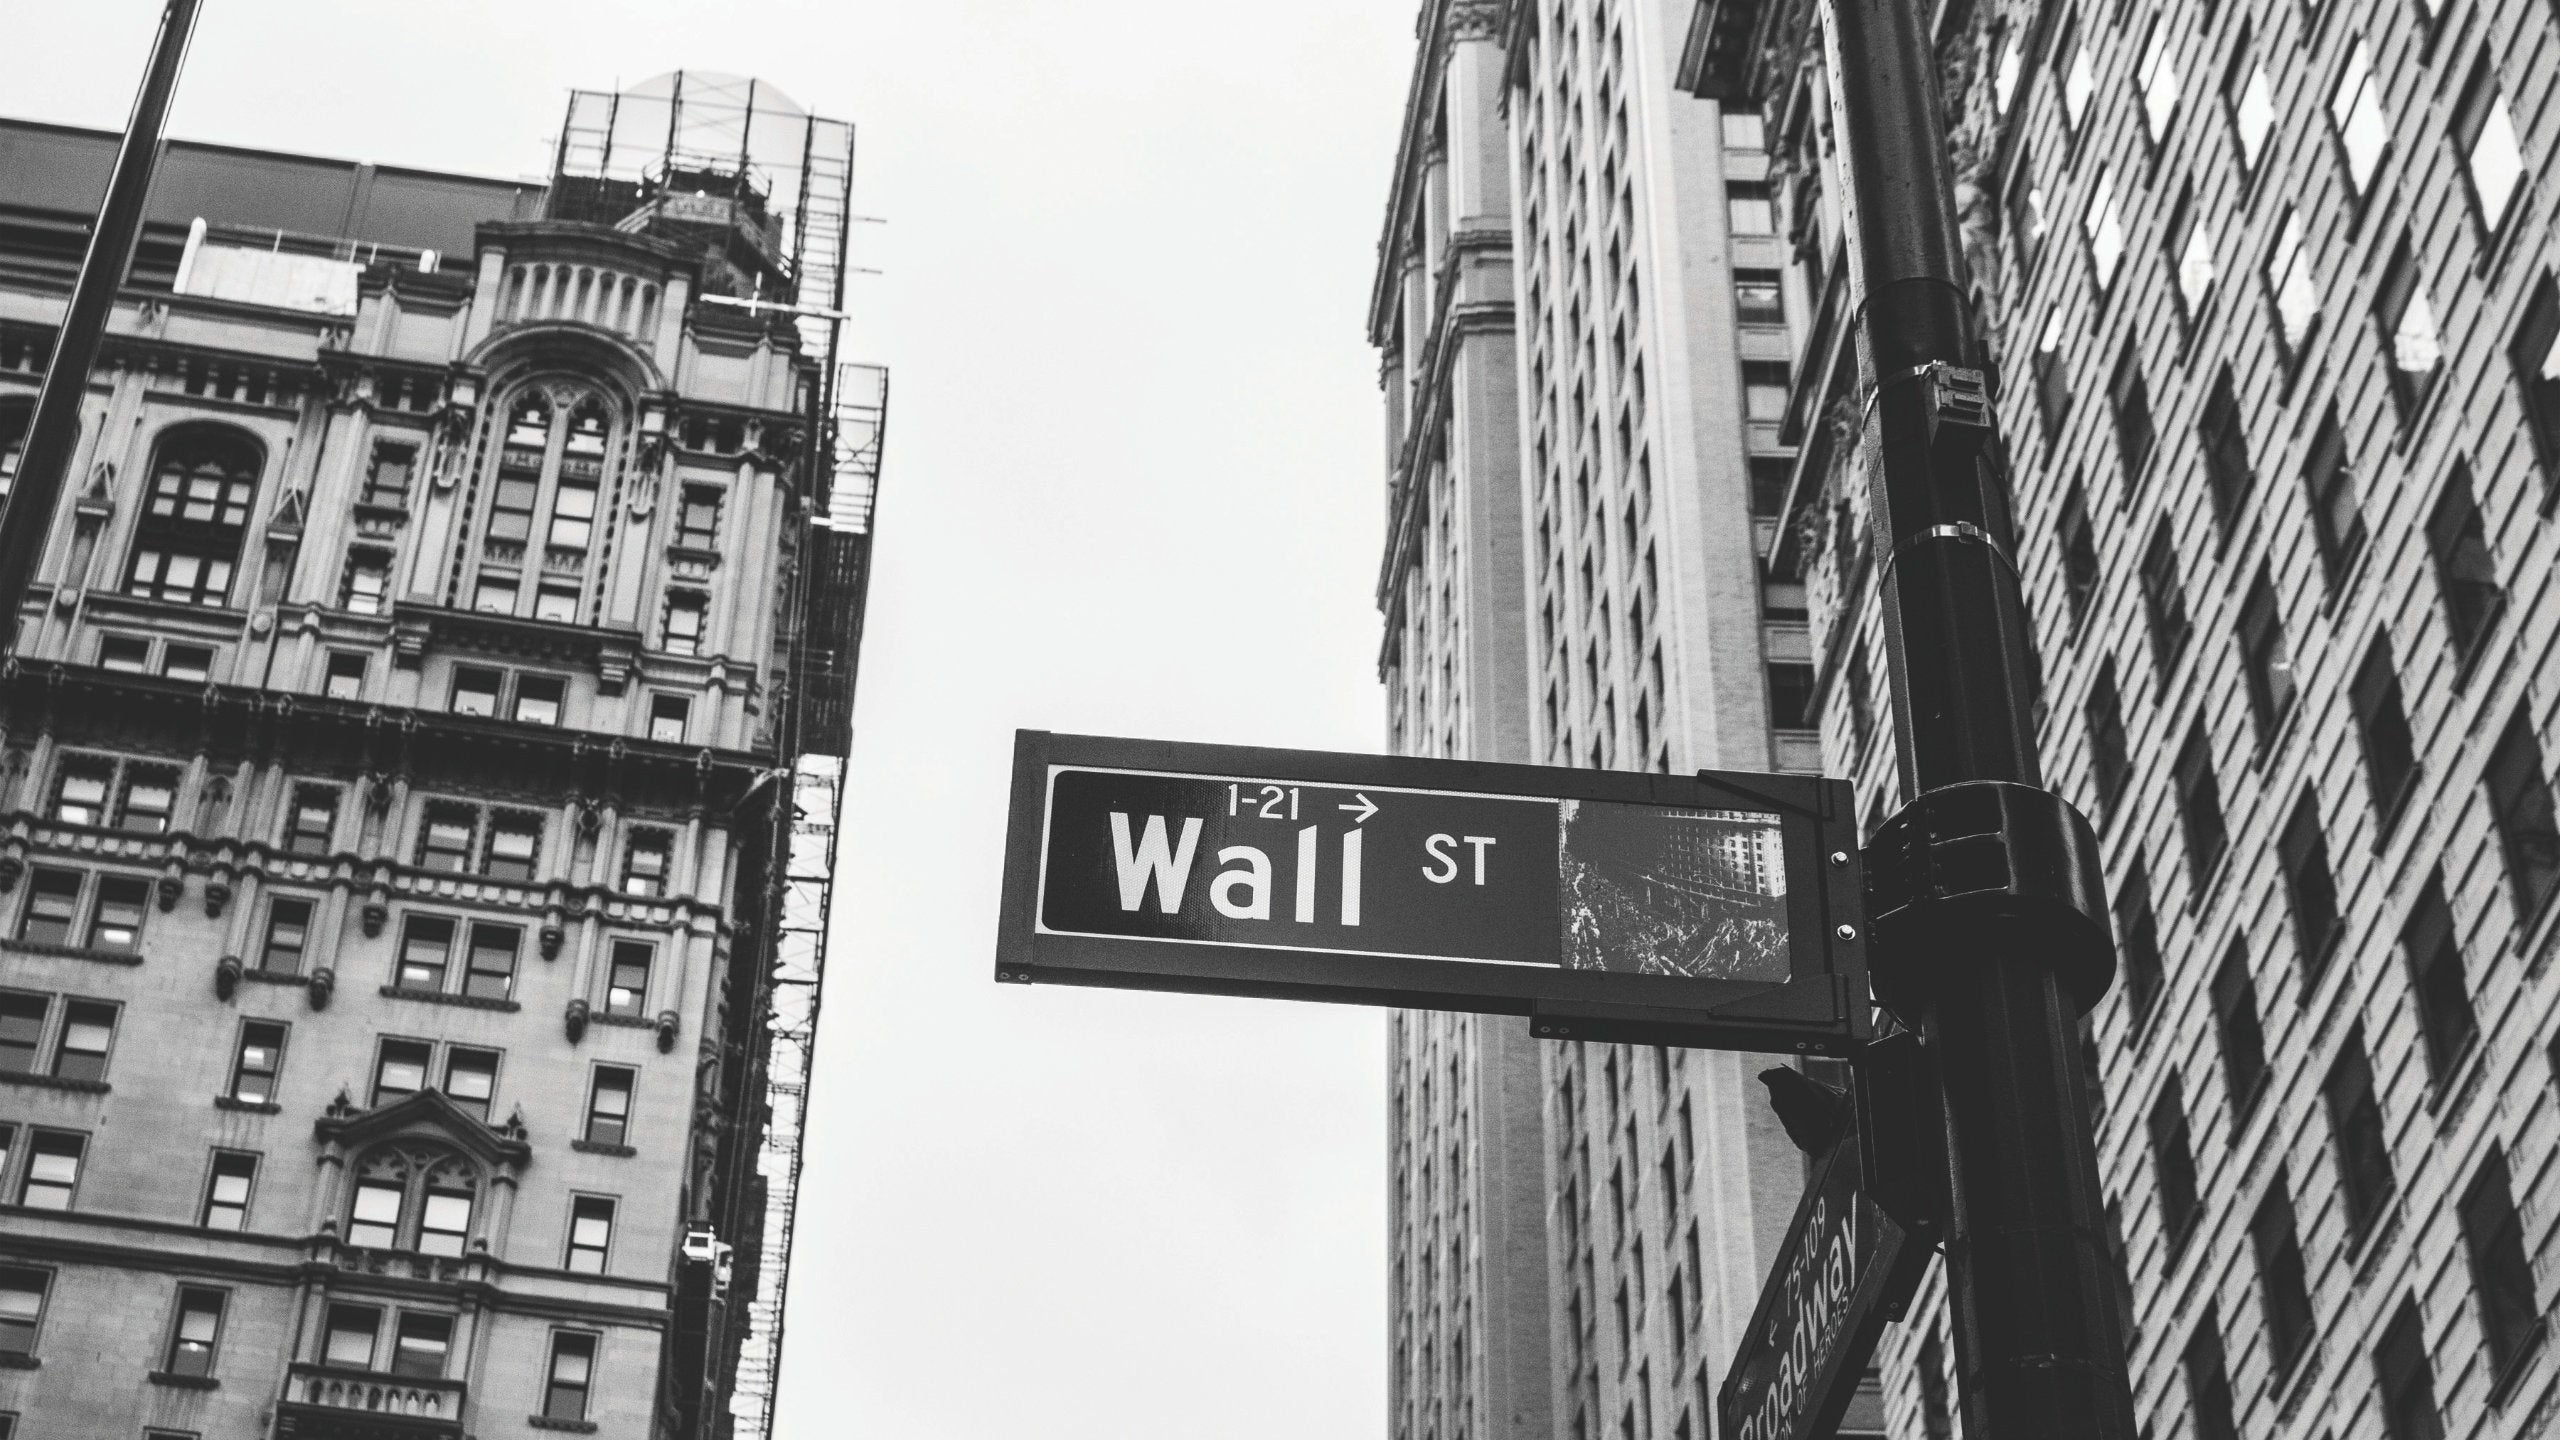 Street sign for Wall Street